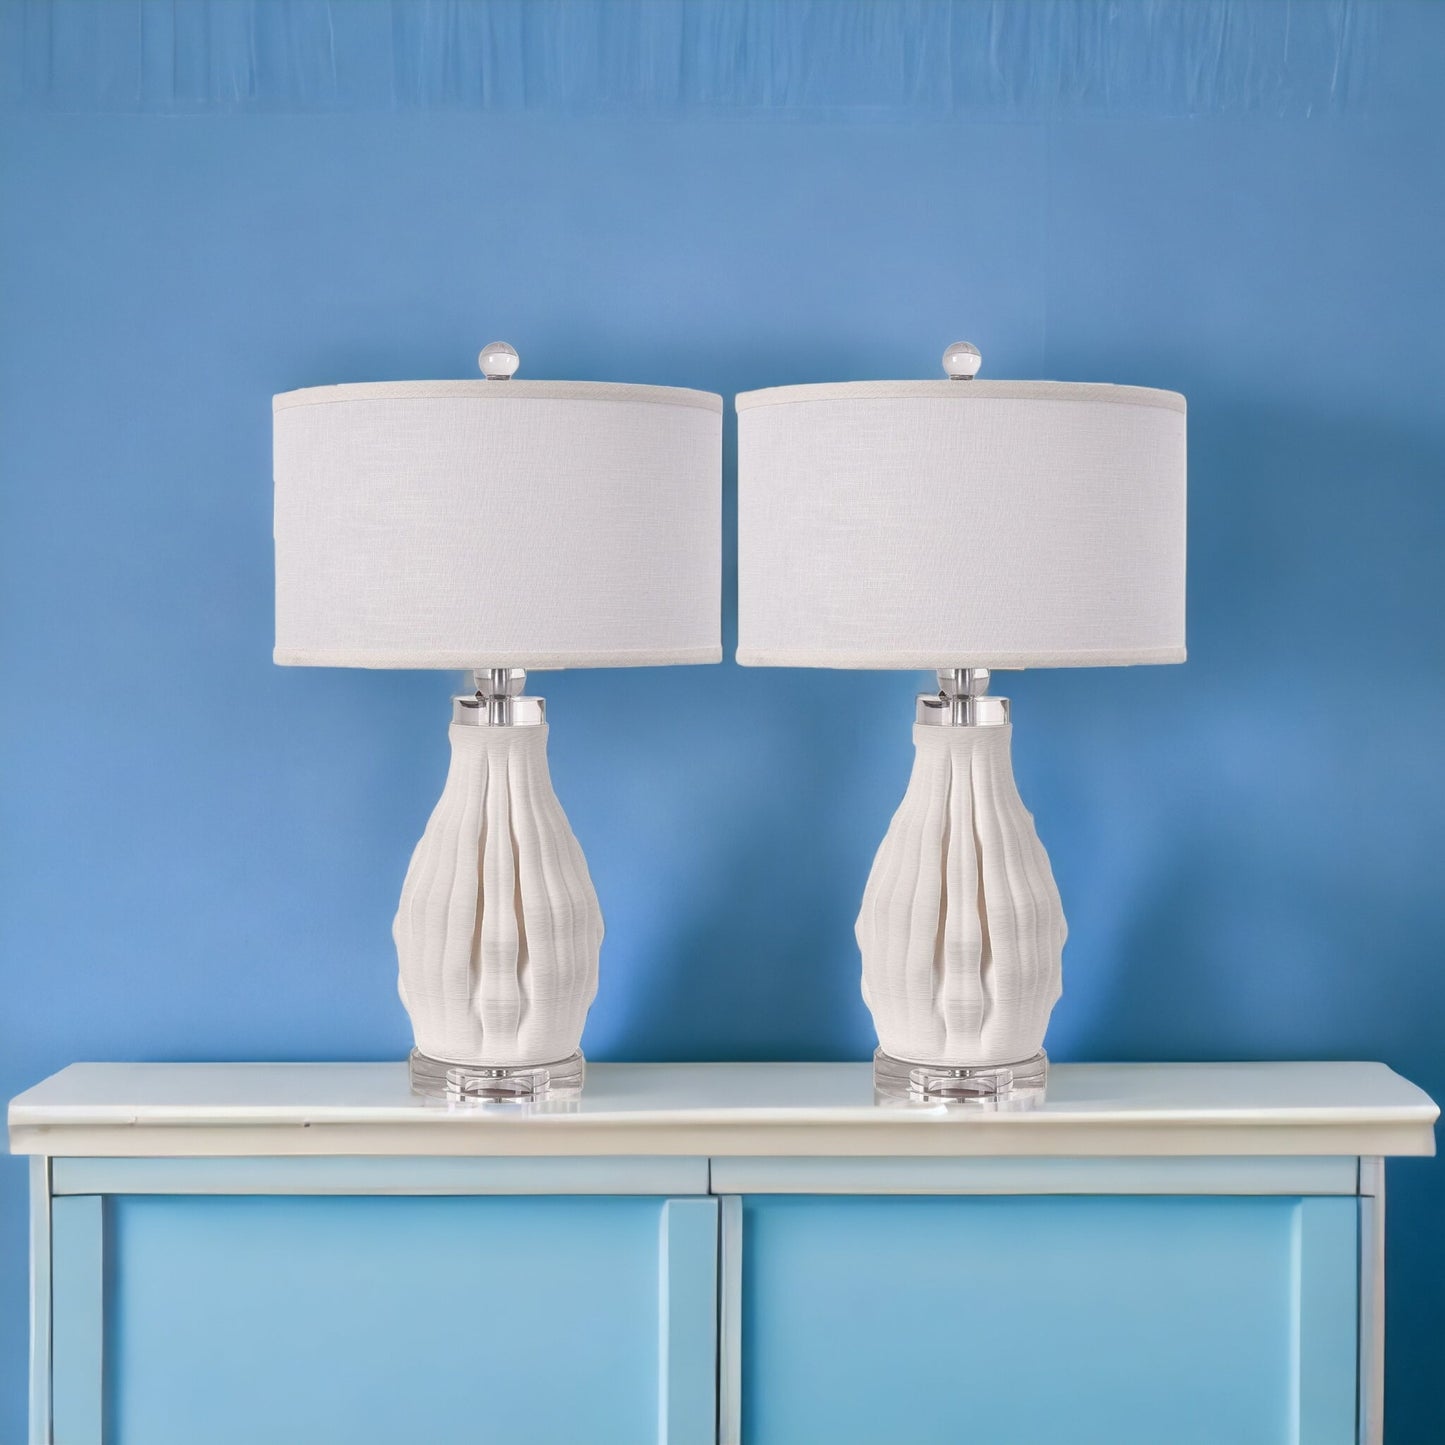 Set of Two 22" White Ceramic Bedside Table Lamps With White Shade